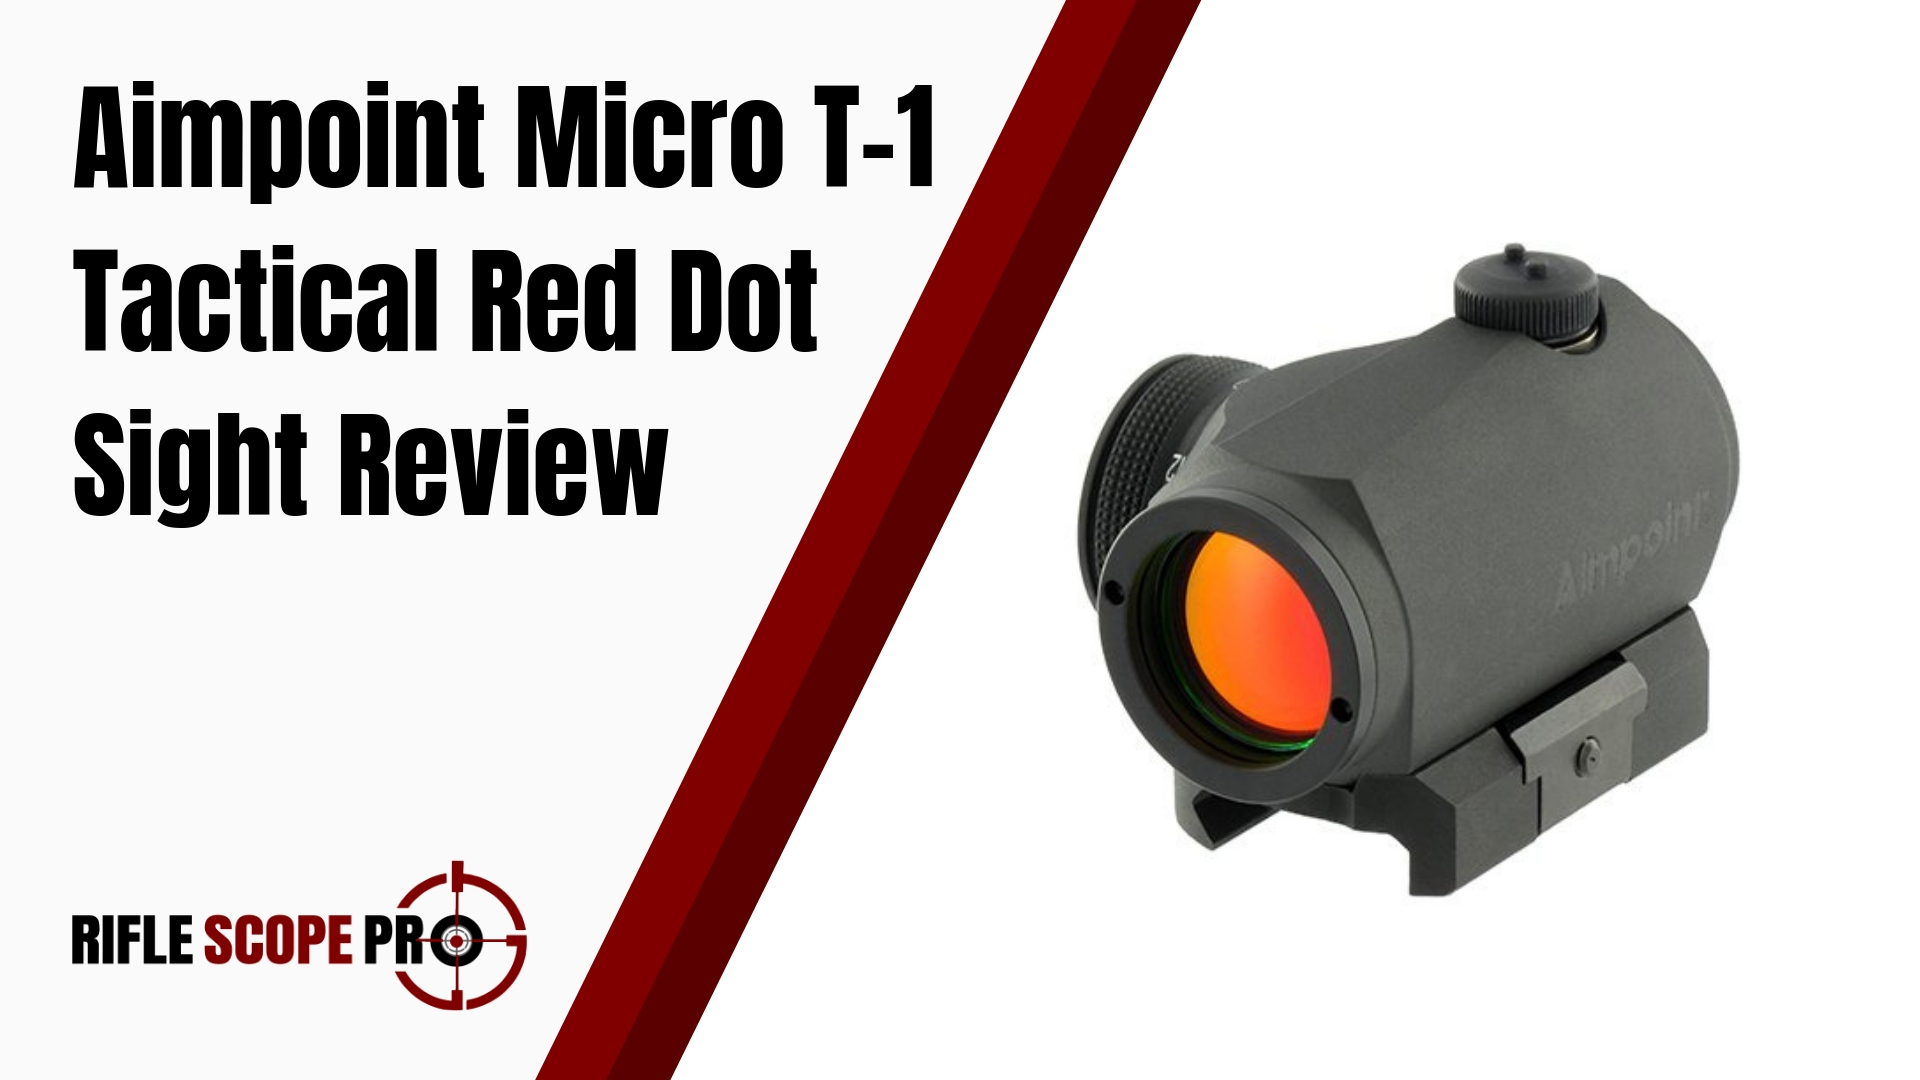 Aimpoint Micro T-1 Tactical Red Dot Sight Review